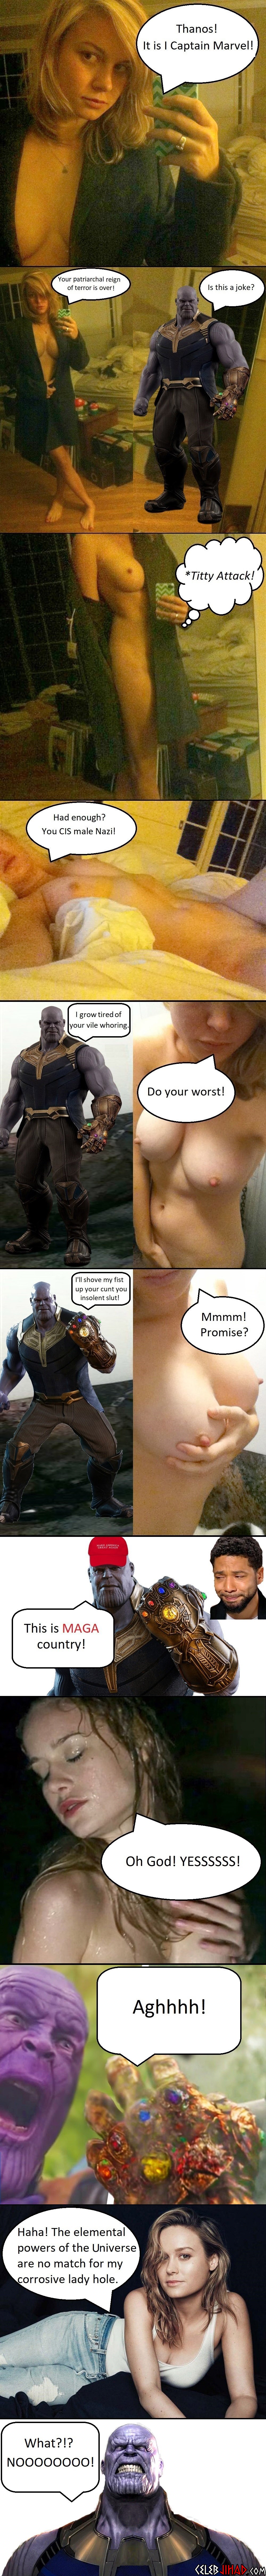 Brie Larson Nude Thanos Battle Leaked